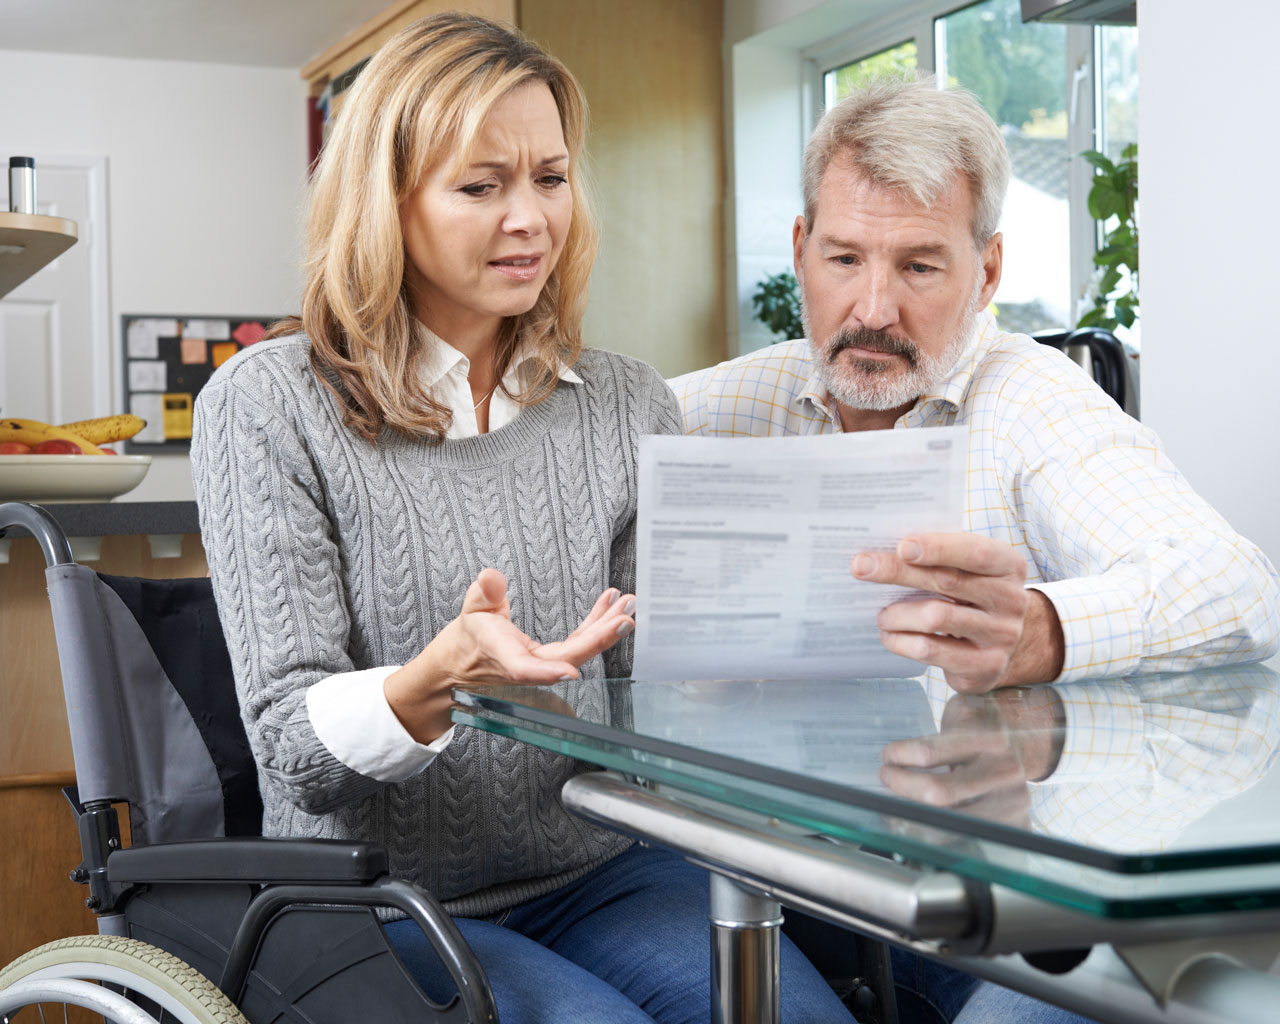 medicaid liens on personal injury settlement